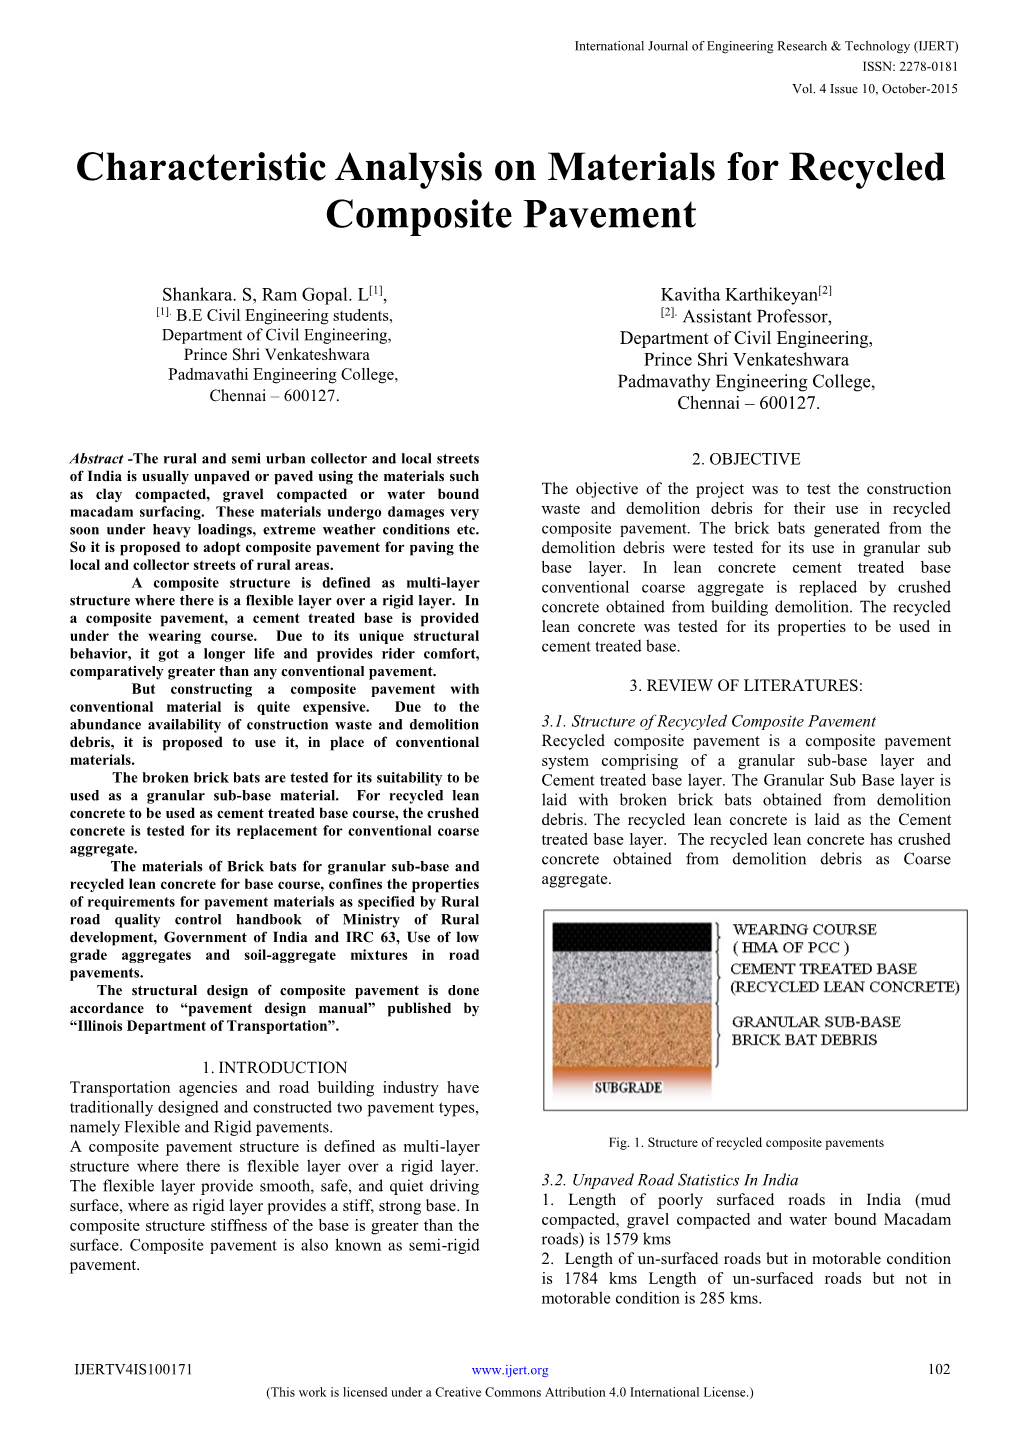 Characteristic Analysis on Materials for Recycled Composite Pavement